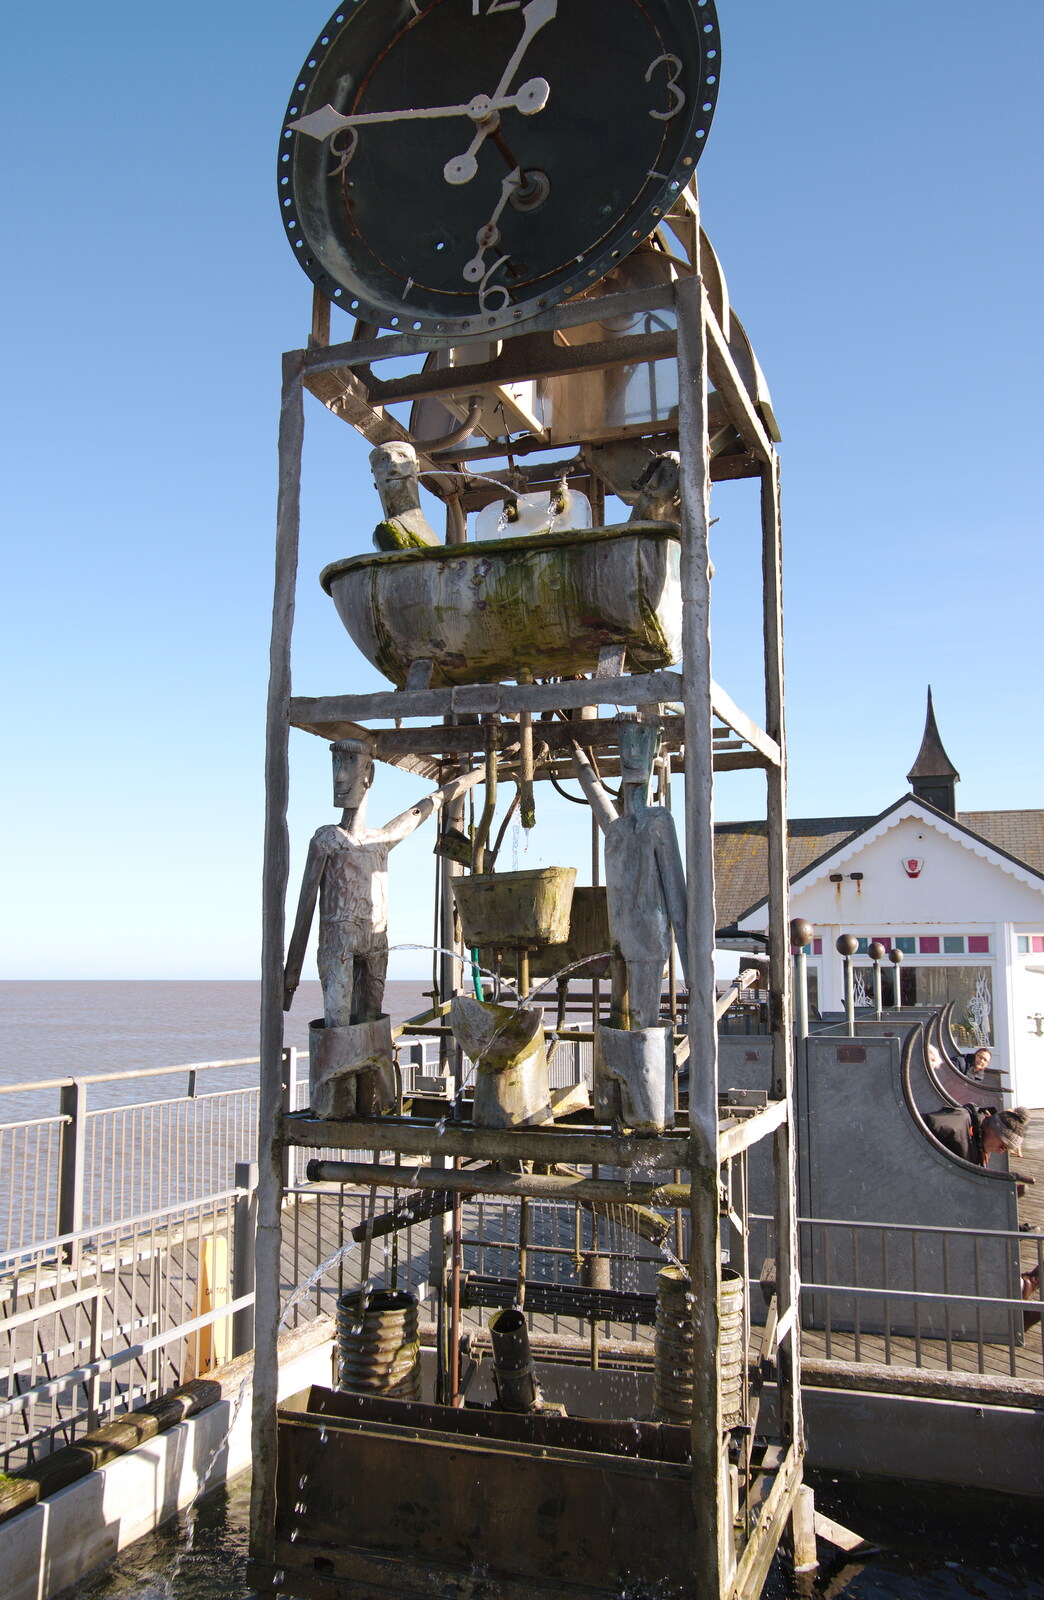 The tin men are still doing their comedy weeing from A Trip up a Lighthouse, Southwold, Suffolk - 27th October 2019